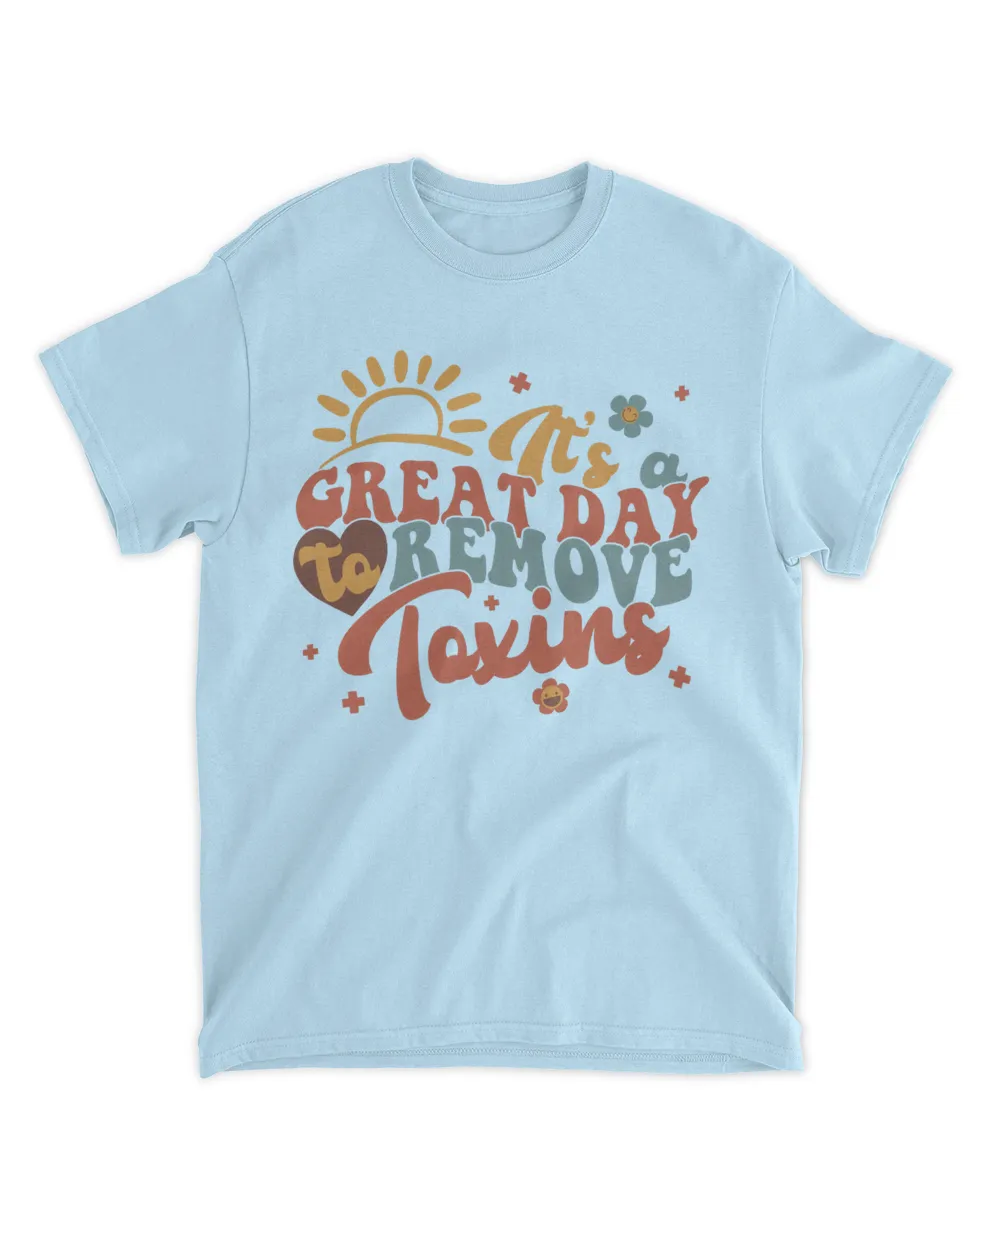 It's A Great Day To Remove Toxins Shirt, Dialysis Nurse Shirt, Dialysis Tech Shirt, Nurse Graduate Gift, New Nurse Gift